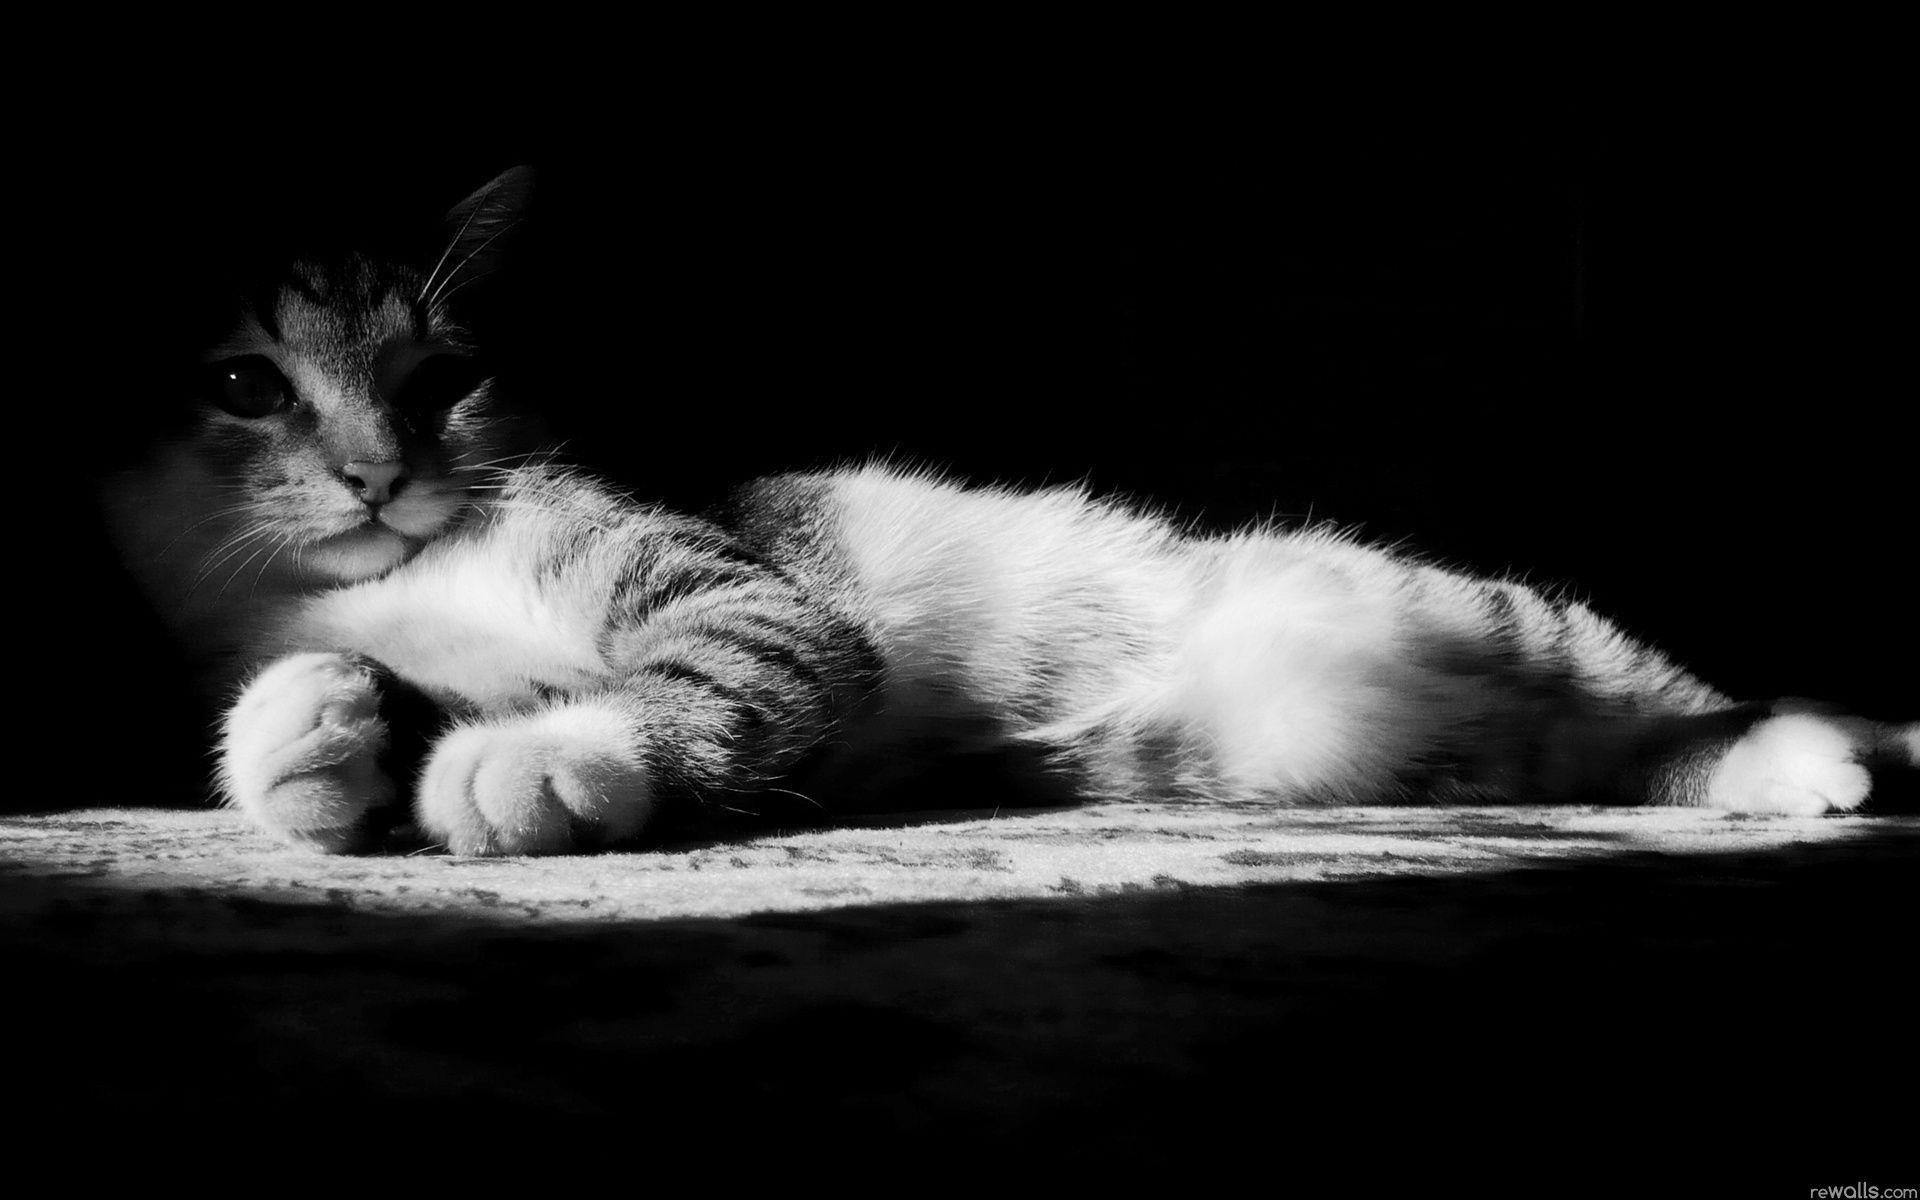 Black and White Cat Wallpapers - Top Free Black and White Cat